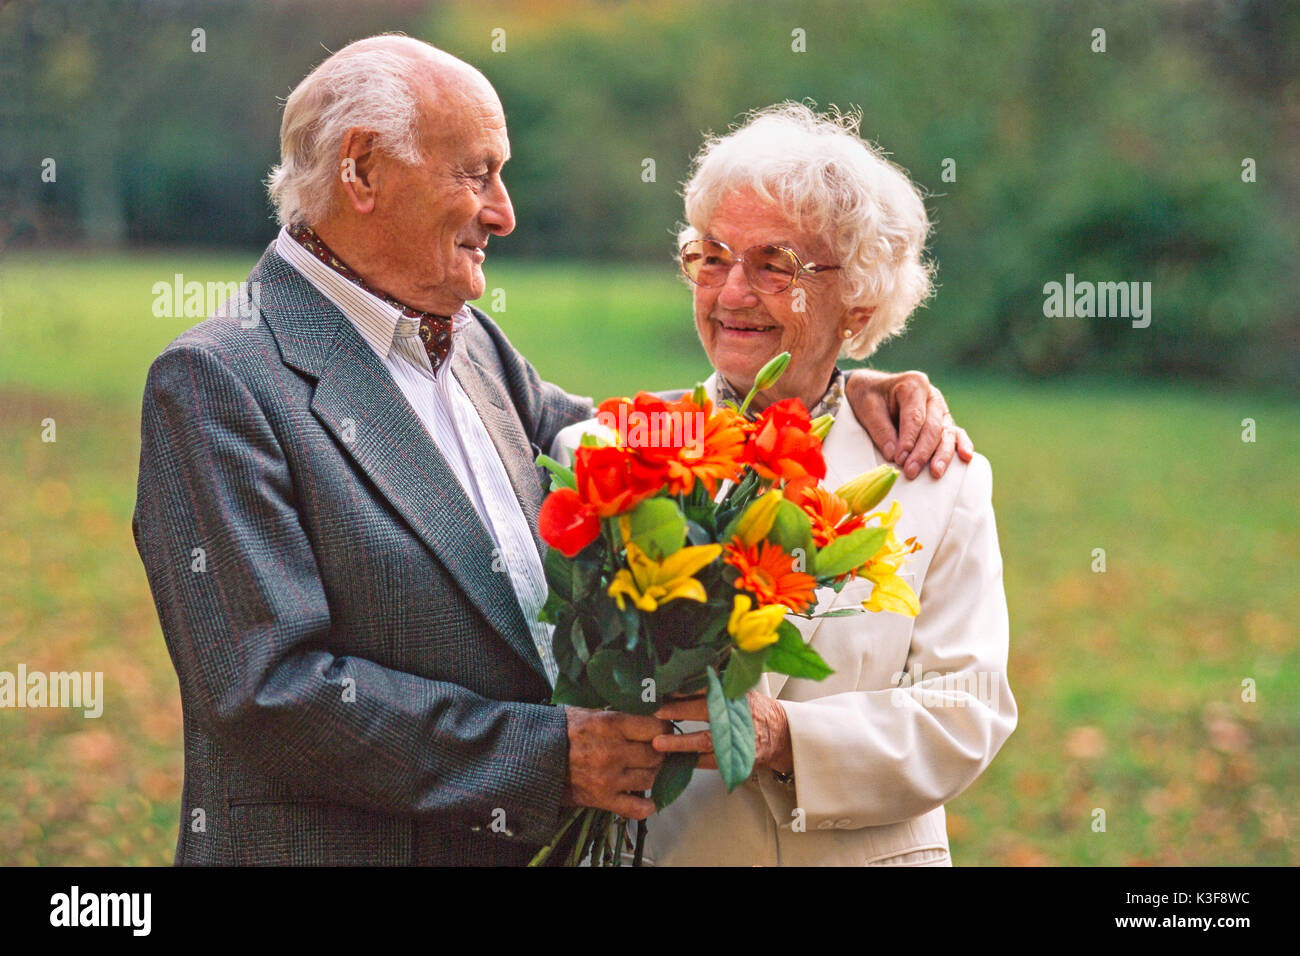 Senior citizen's couple with bouquet, the man has placed his arm around the woman and looks at her Stock Photo